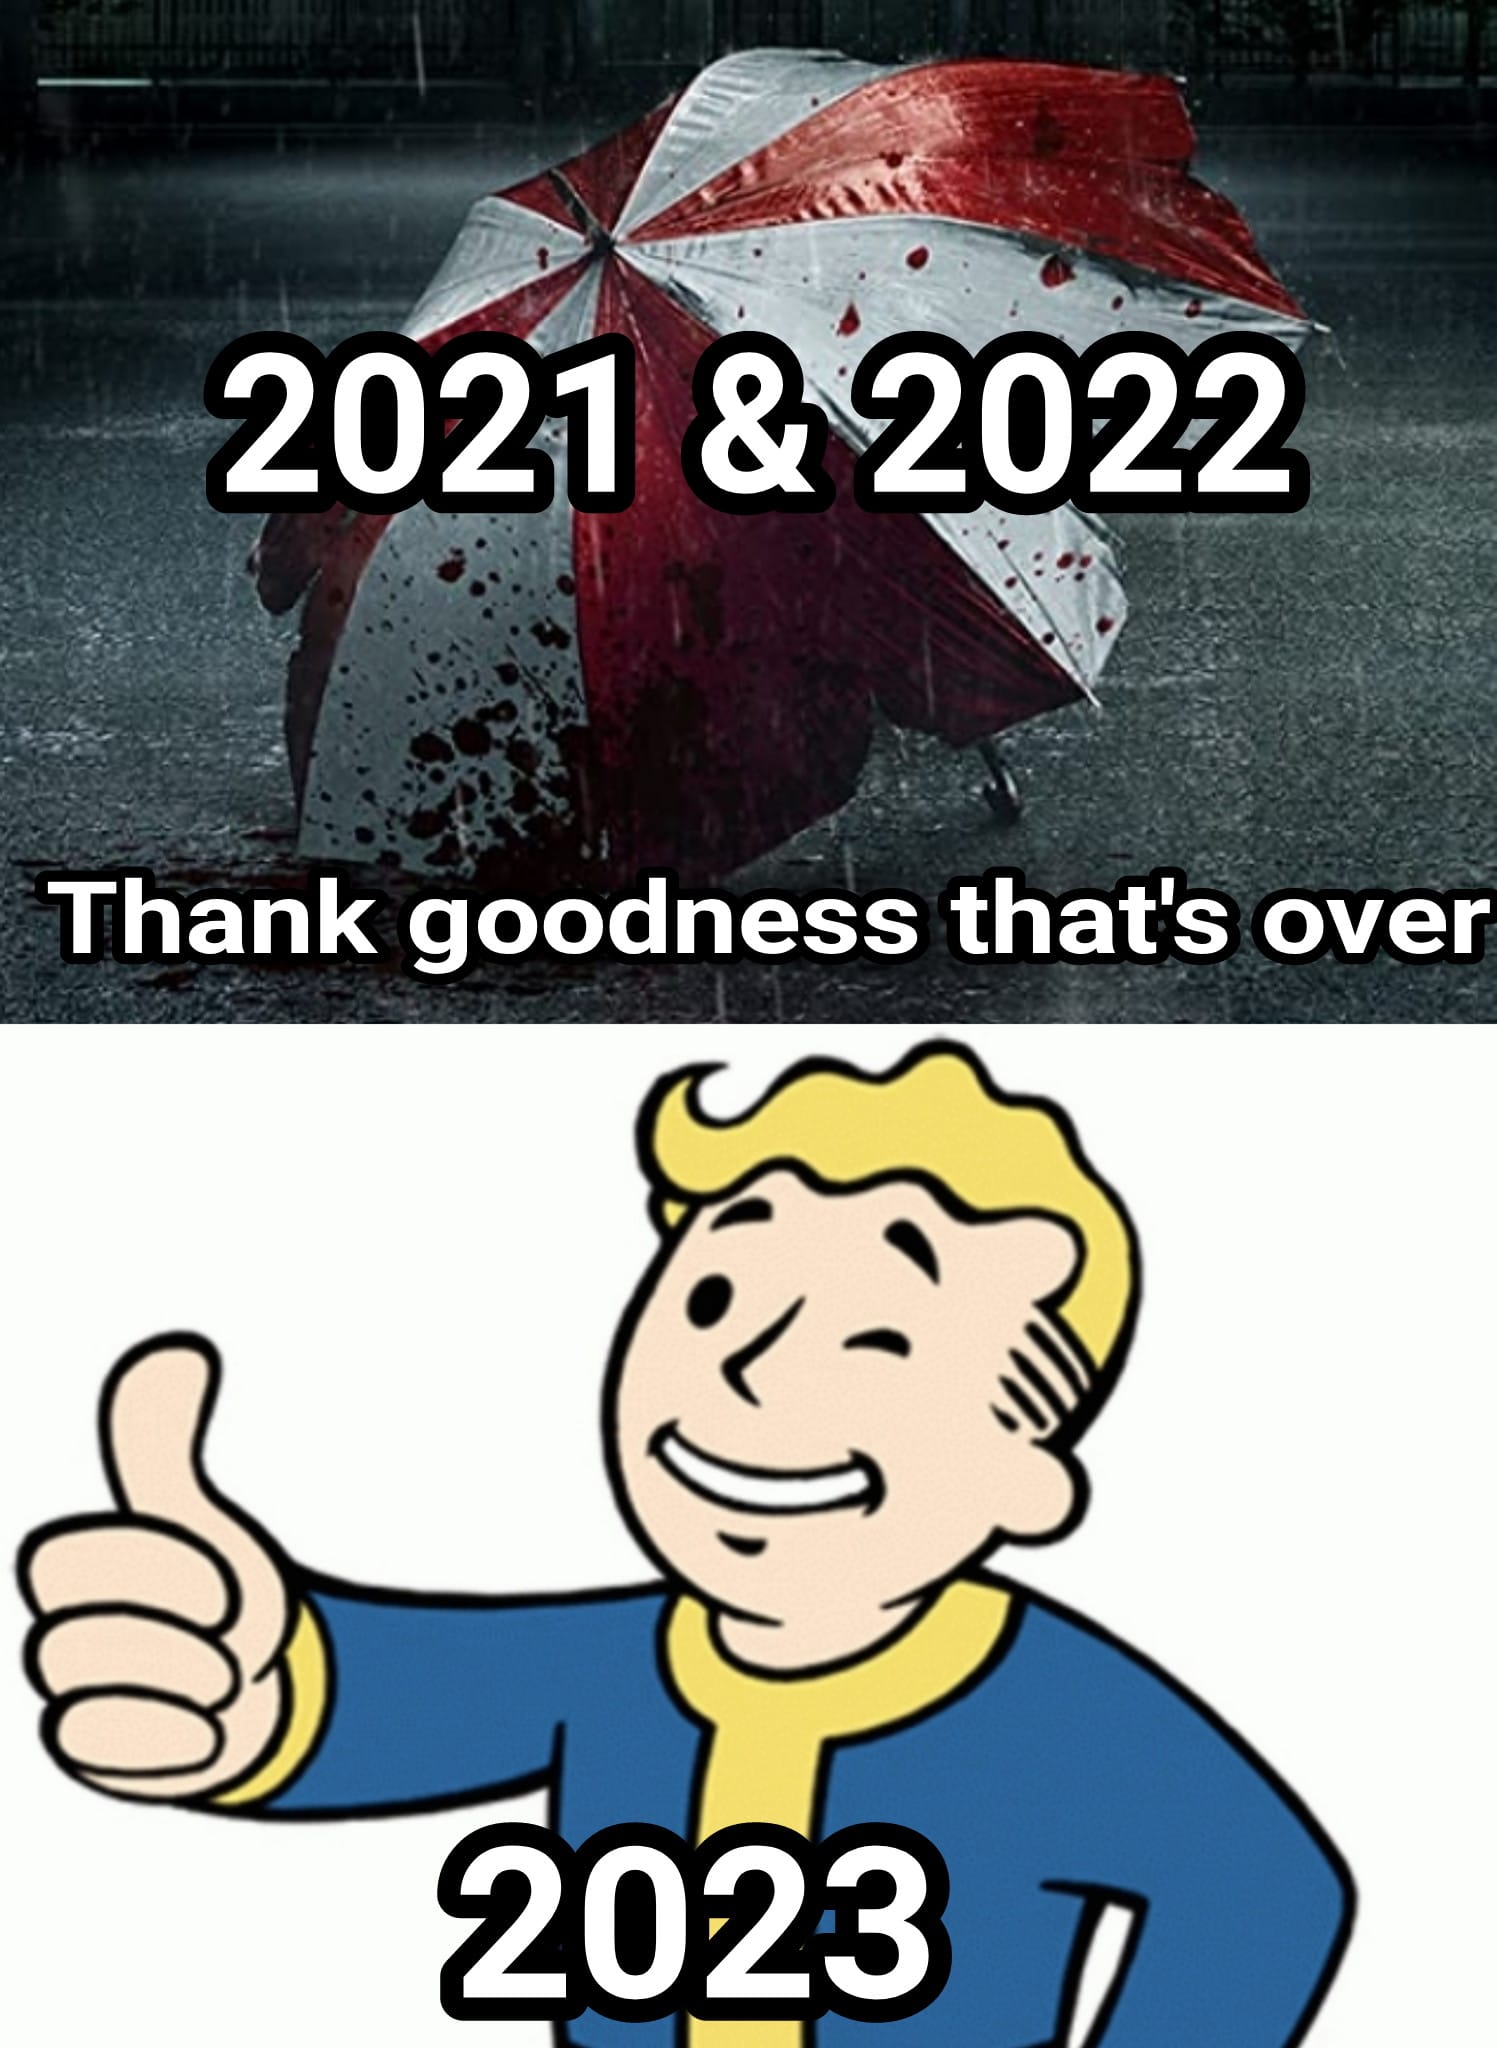 gaming memes - racoon city 2021 - 2021 & 2022 Thank goodness that's over 2023